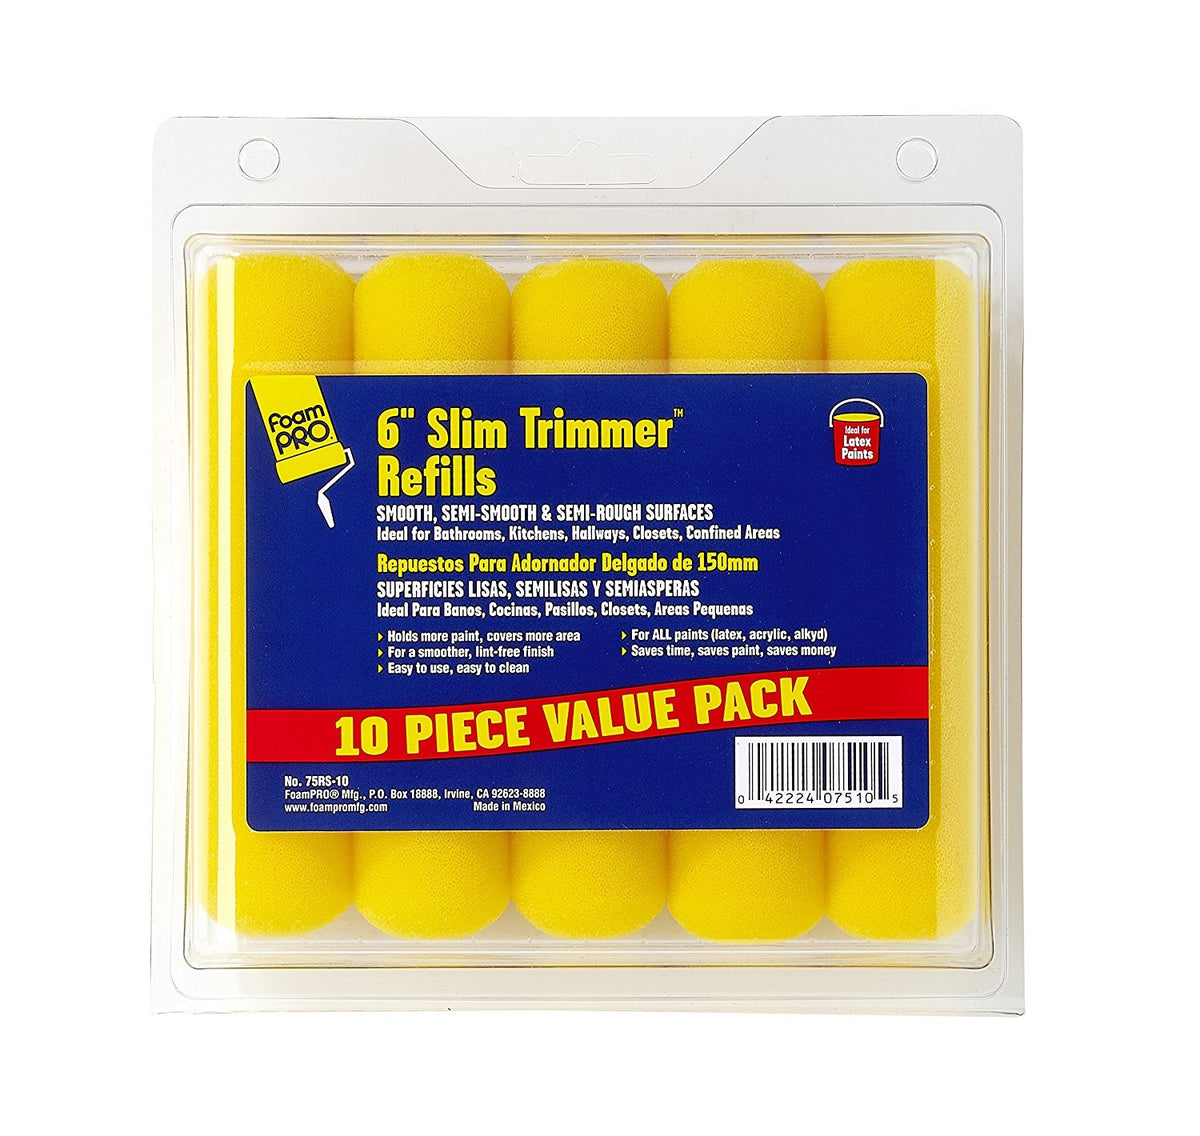 FoamPro 75RS-10 Slim Trimmer Paint Roller Cover, 6",